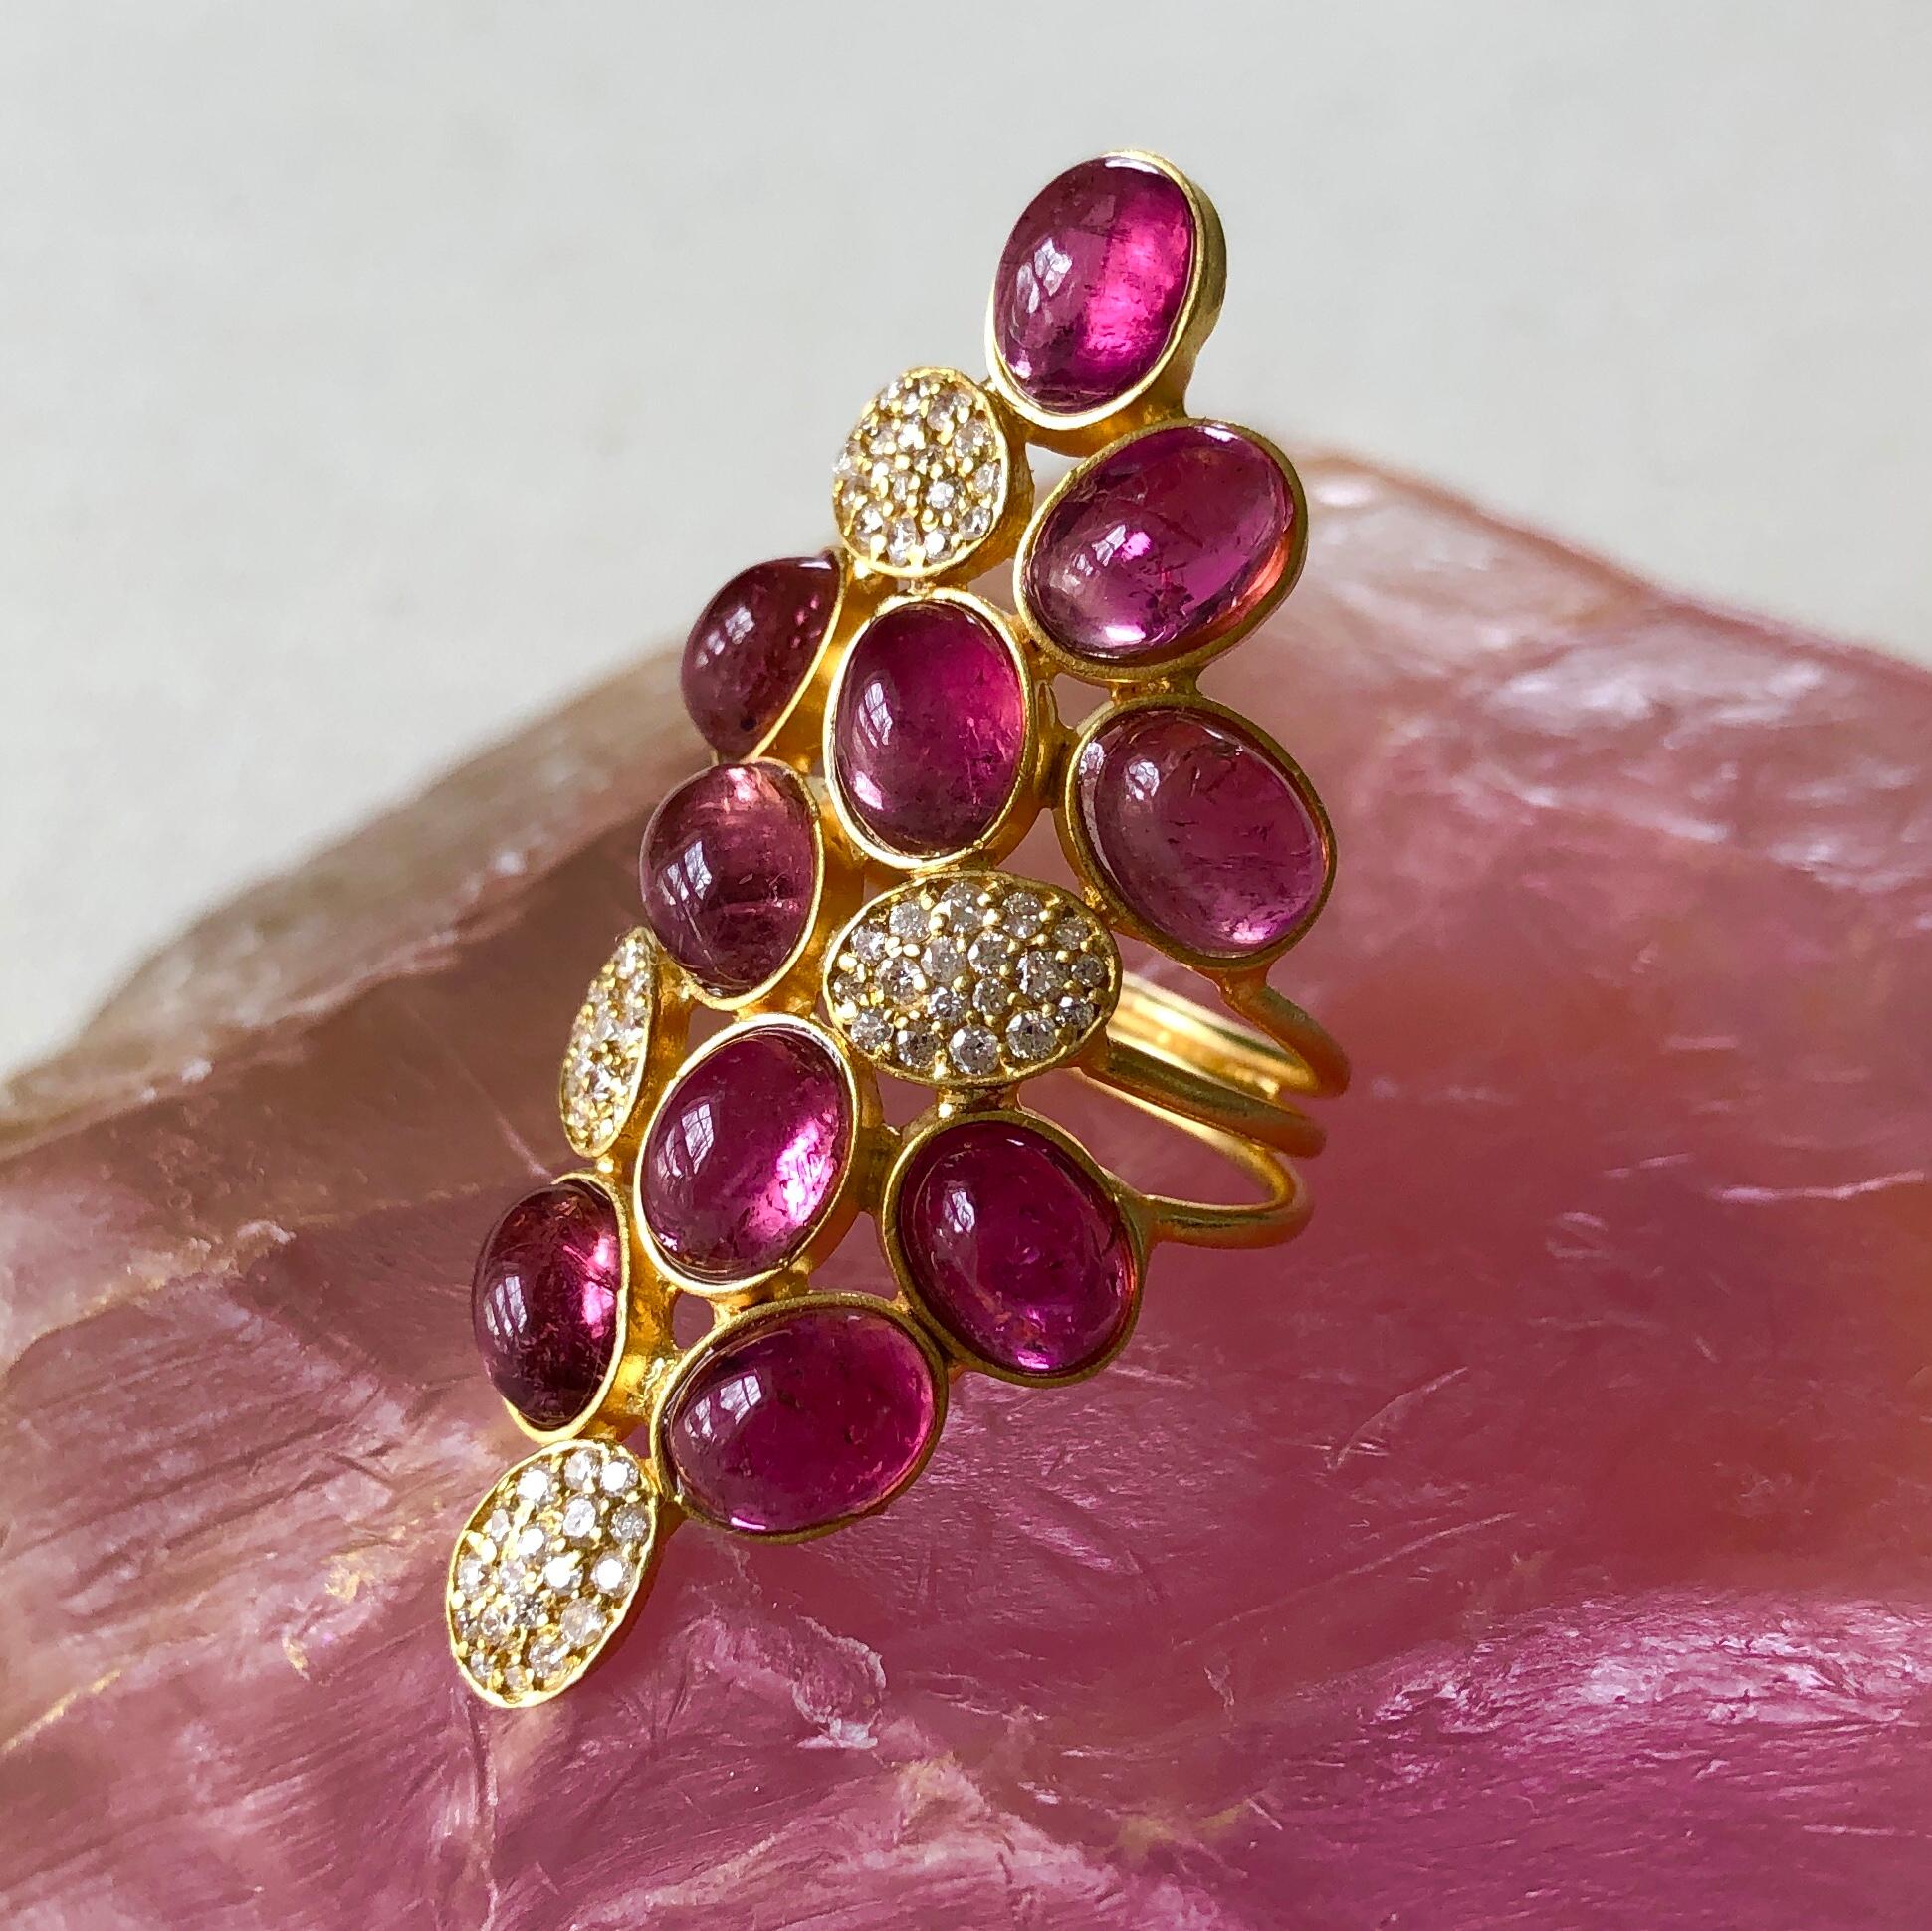 11.51ct Pink Tourmaline and .49cts Diamond stunning cocktail ring.  Ring sits comfortably low on the finger, and has a beautiful 18kt Gold matte finish. Pink Tourmaline is vibrant and natural, and cut in oval cabachons.  Diamonds are set in a white